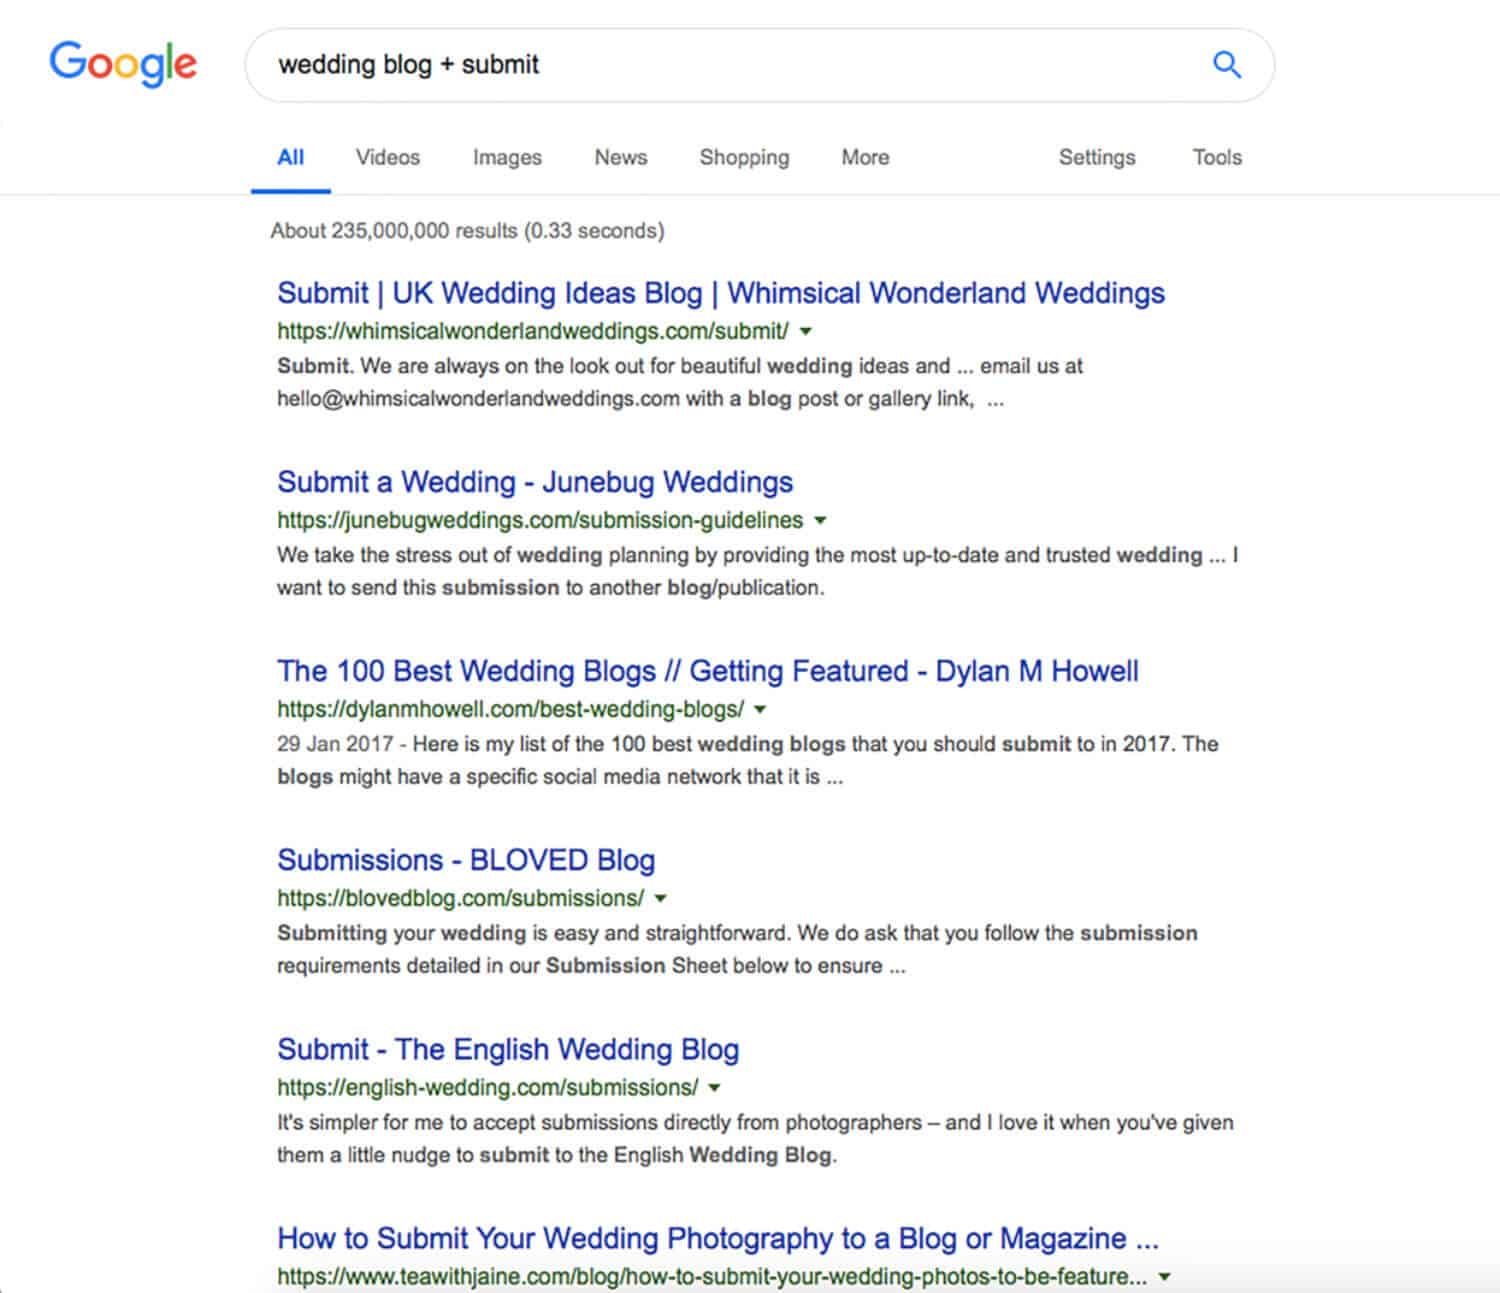 The Complete Guide To Local SEO For Wedding Venues & Suppliers Sinfa Digital Designs